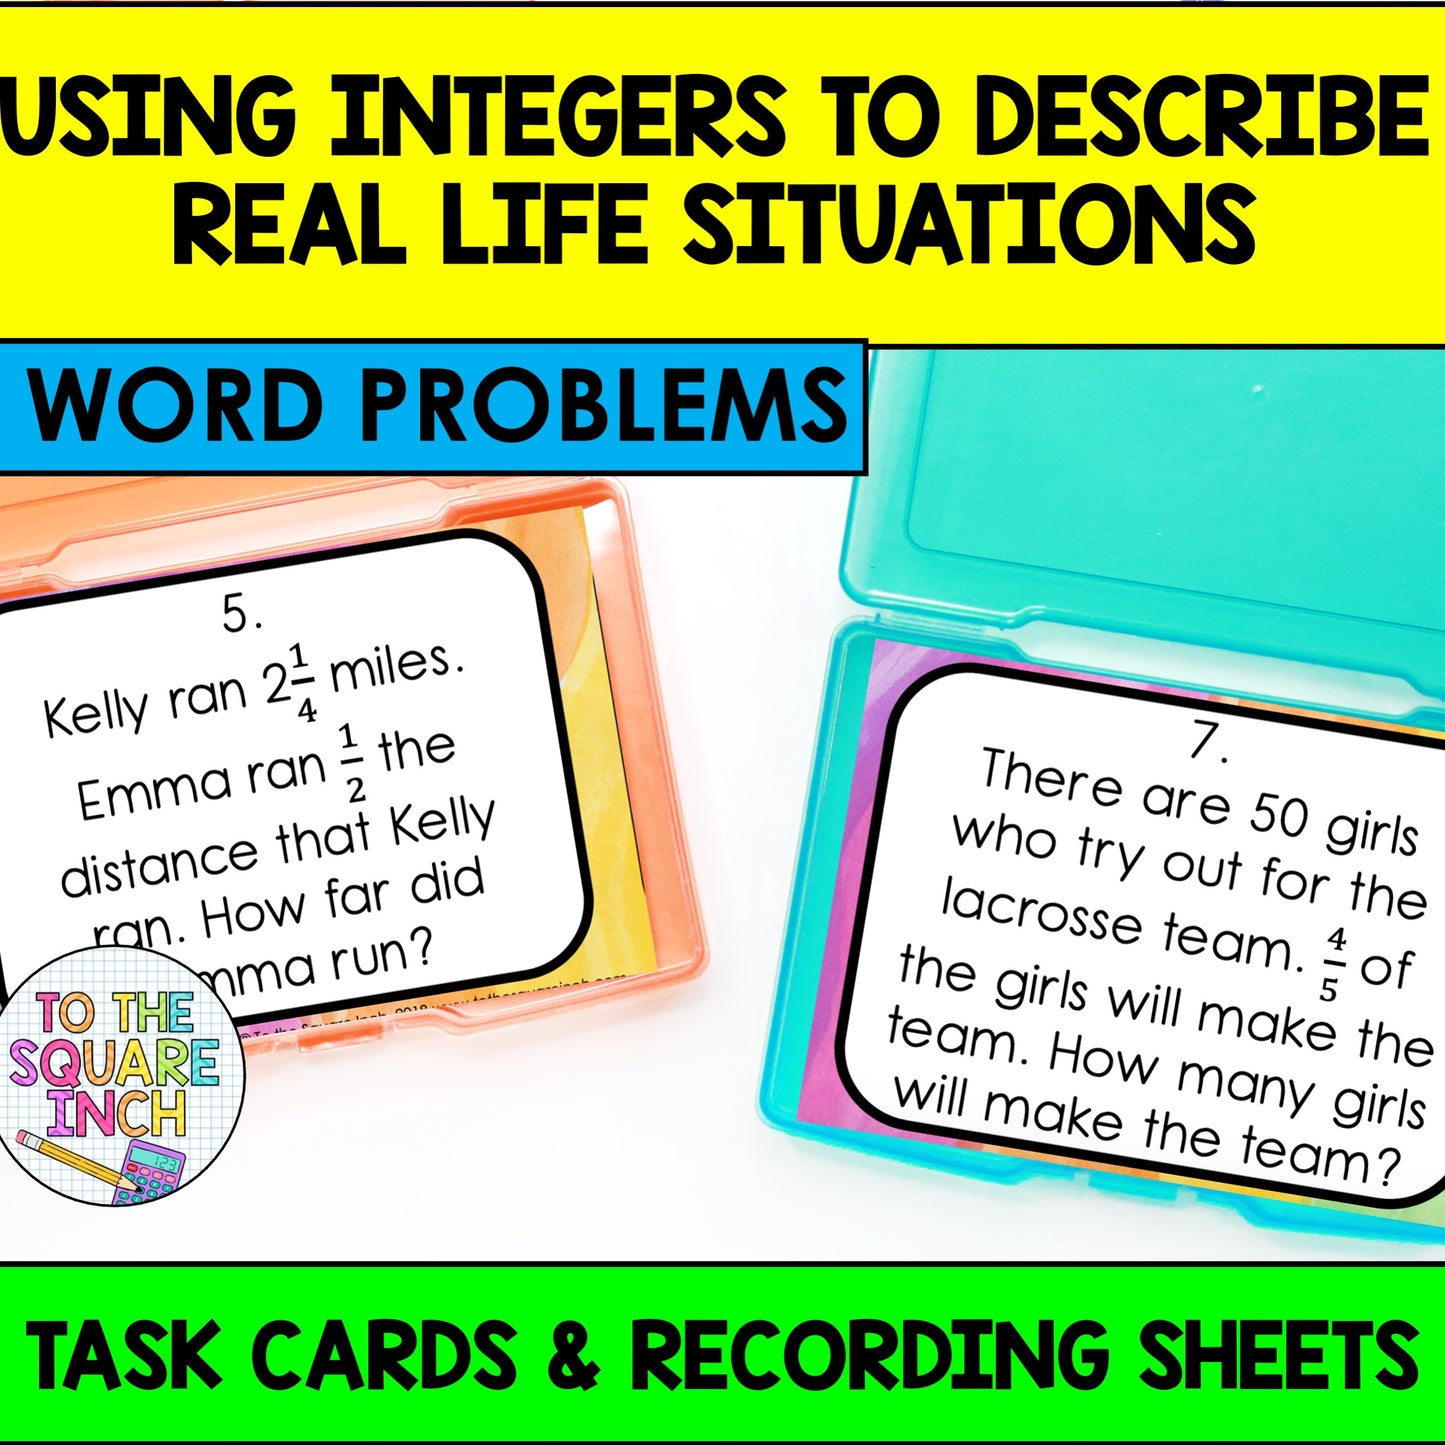 Using Integers to Describe Real Life Situations Task Cards